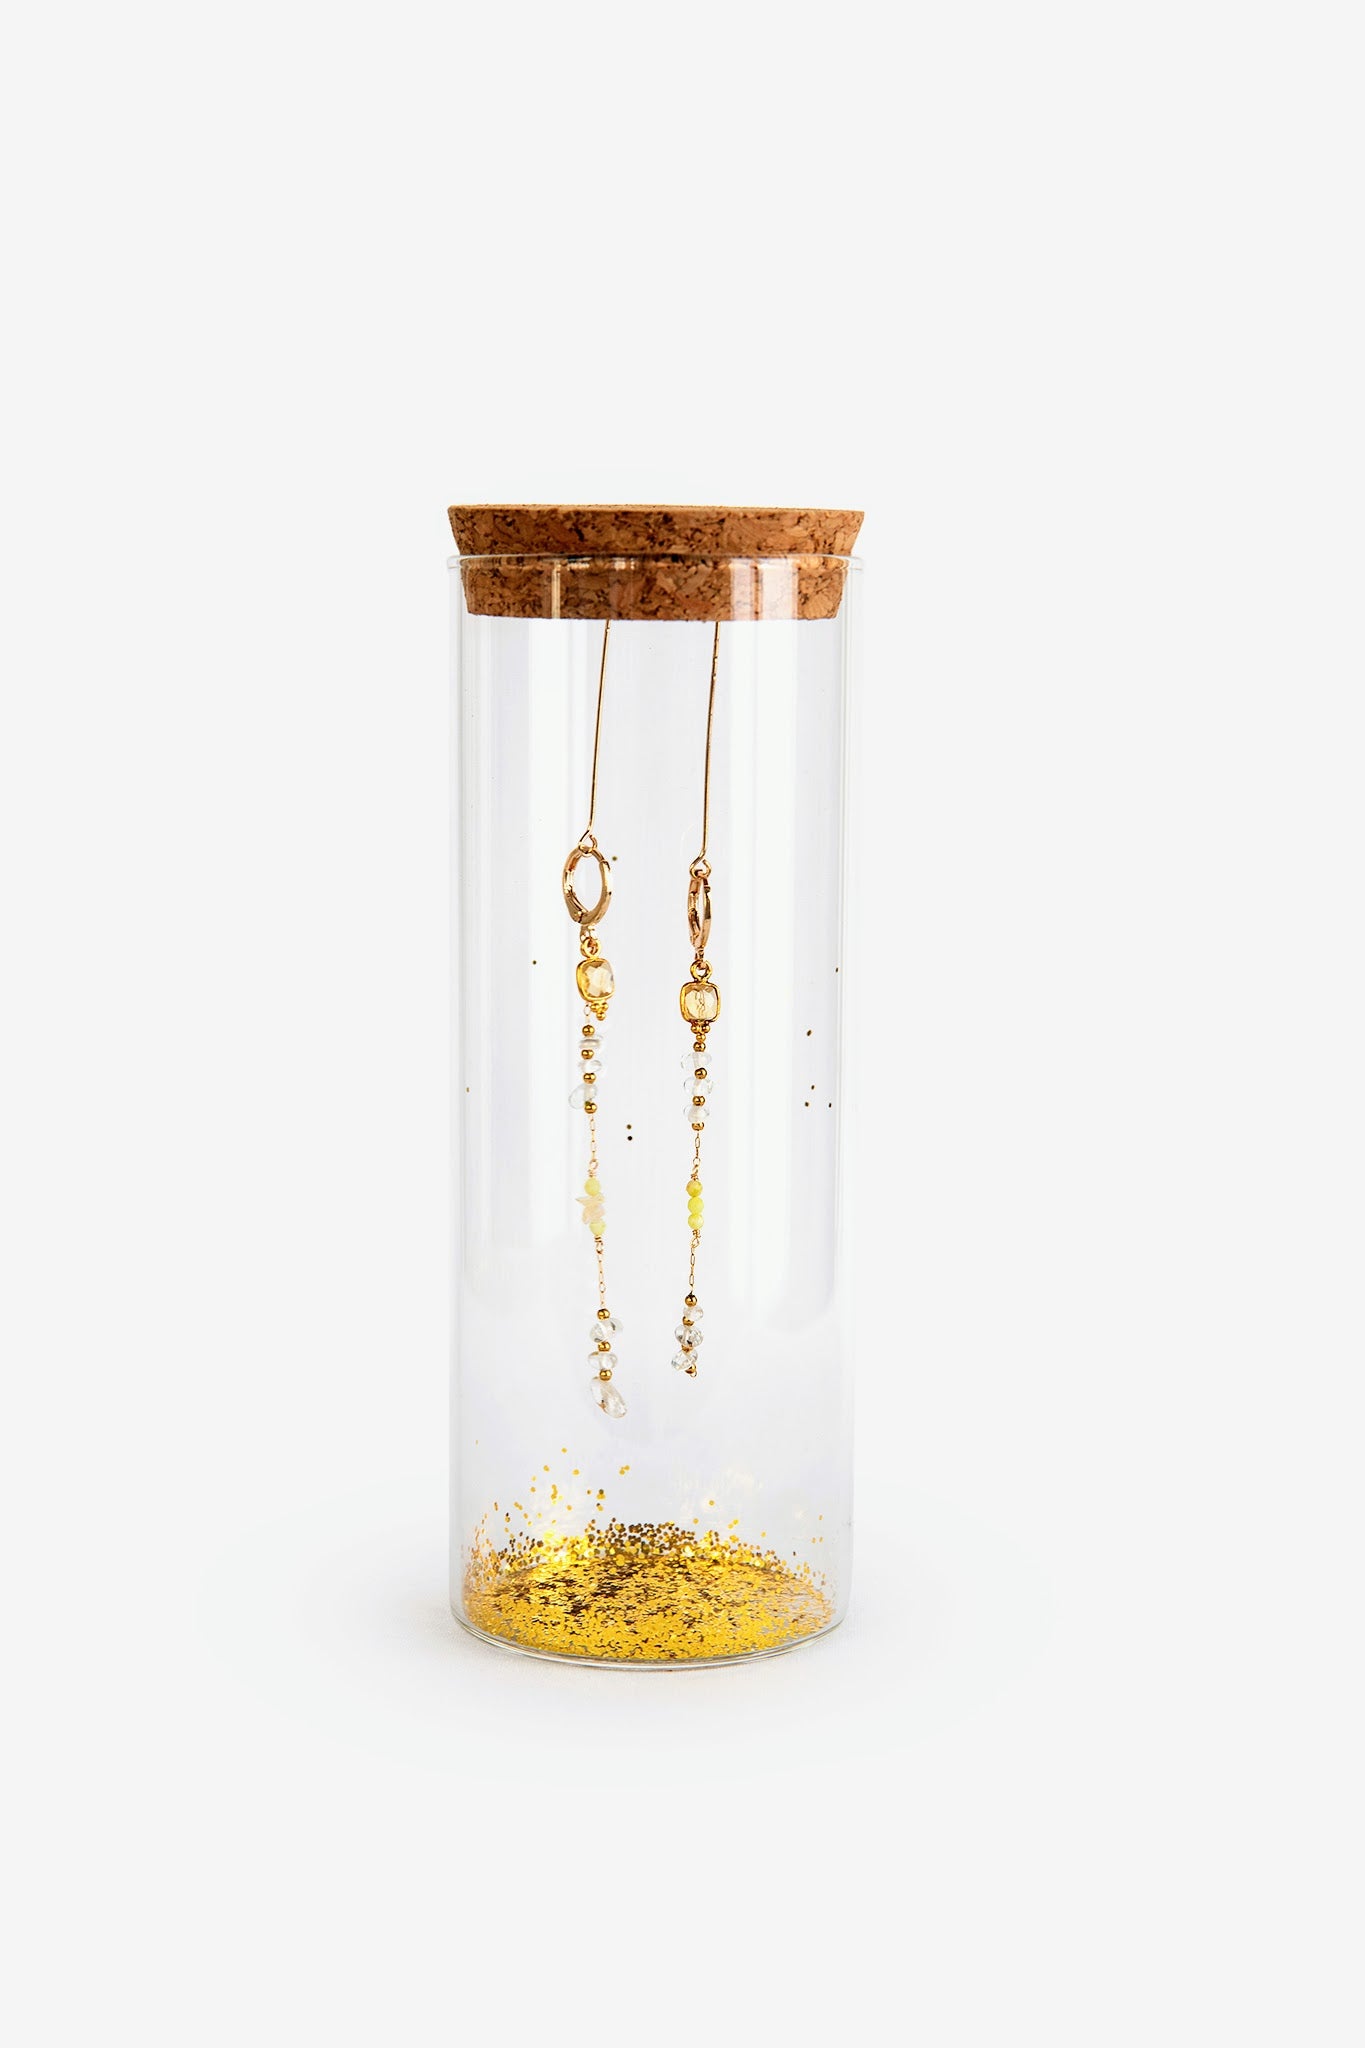 SG14 - Element earrings with Citrine and Clear Quartz